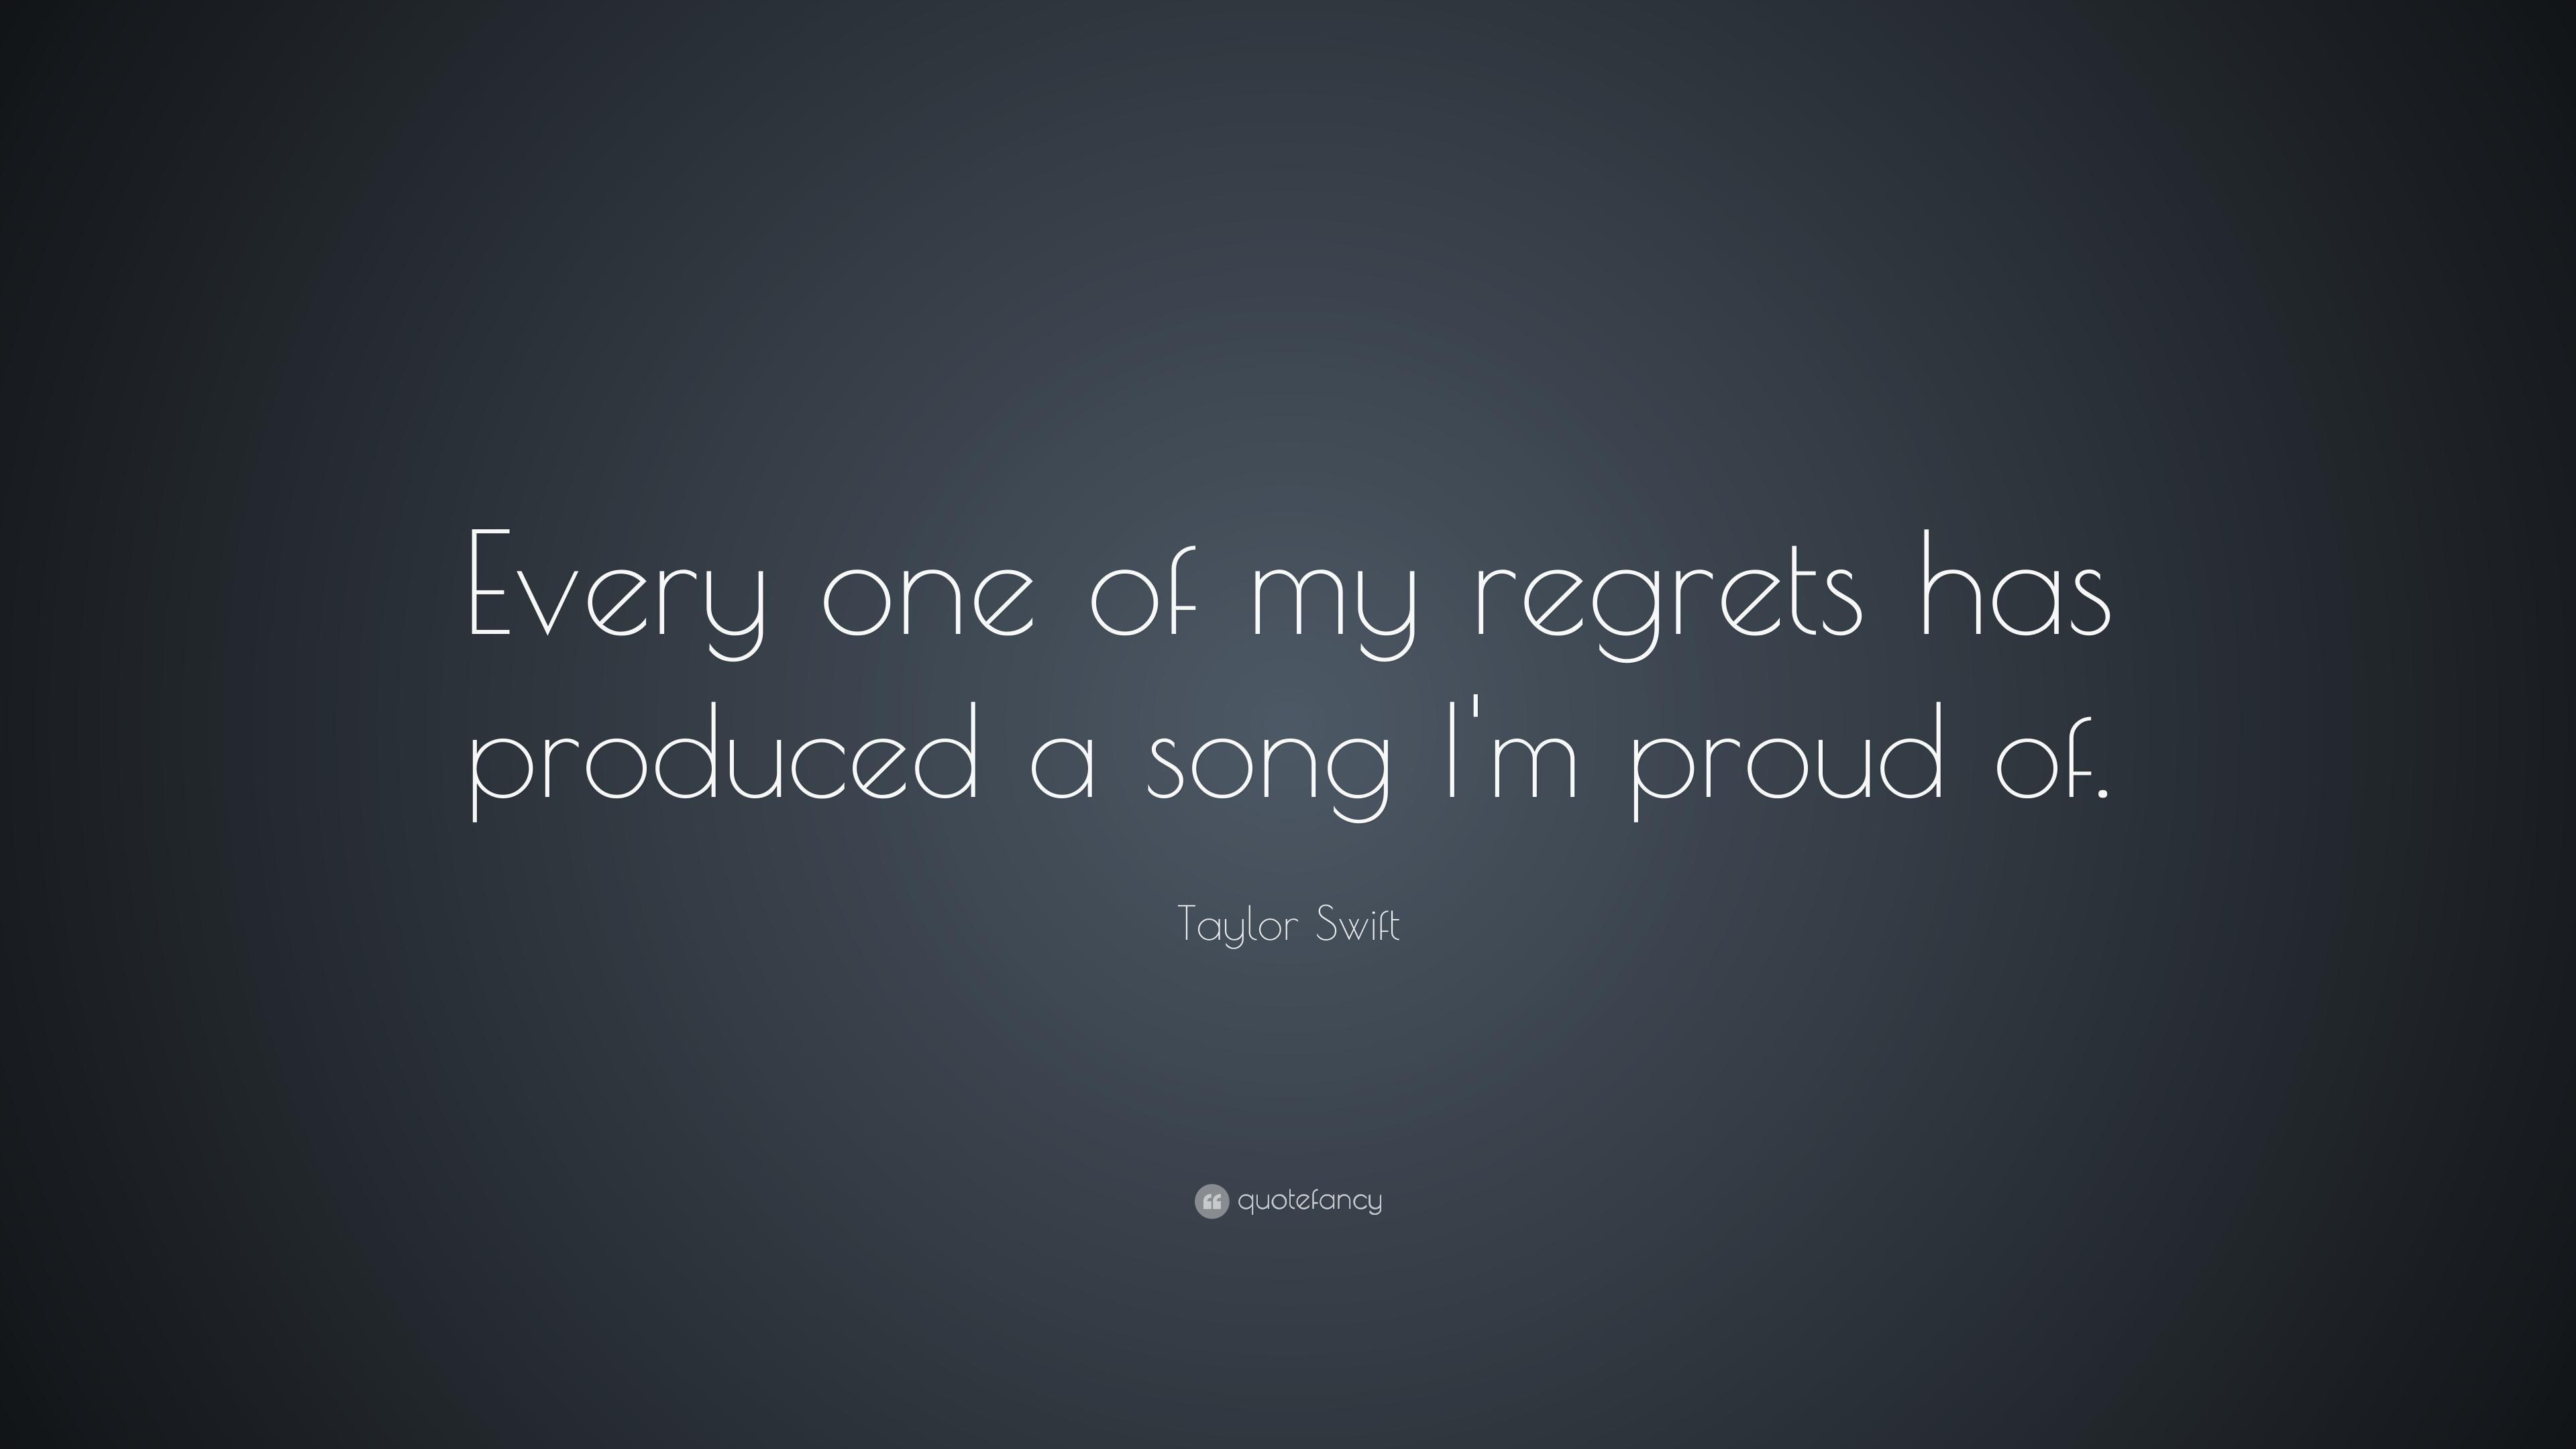 Taylor Swift Quote: “Every one of my regrets has produced a song I'm